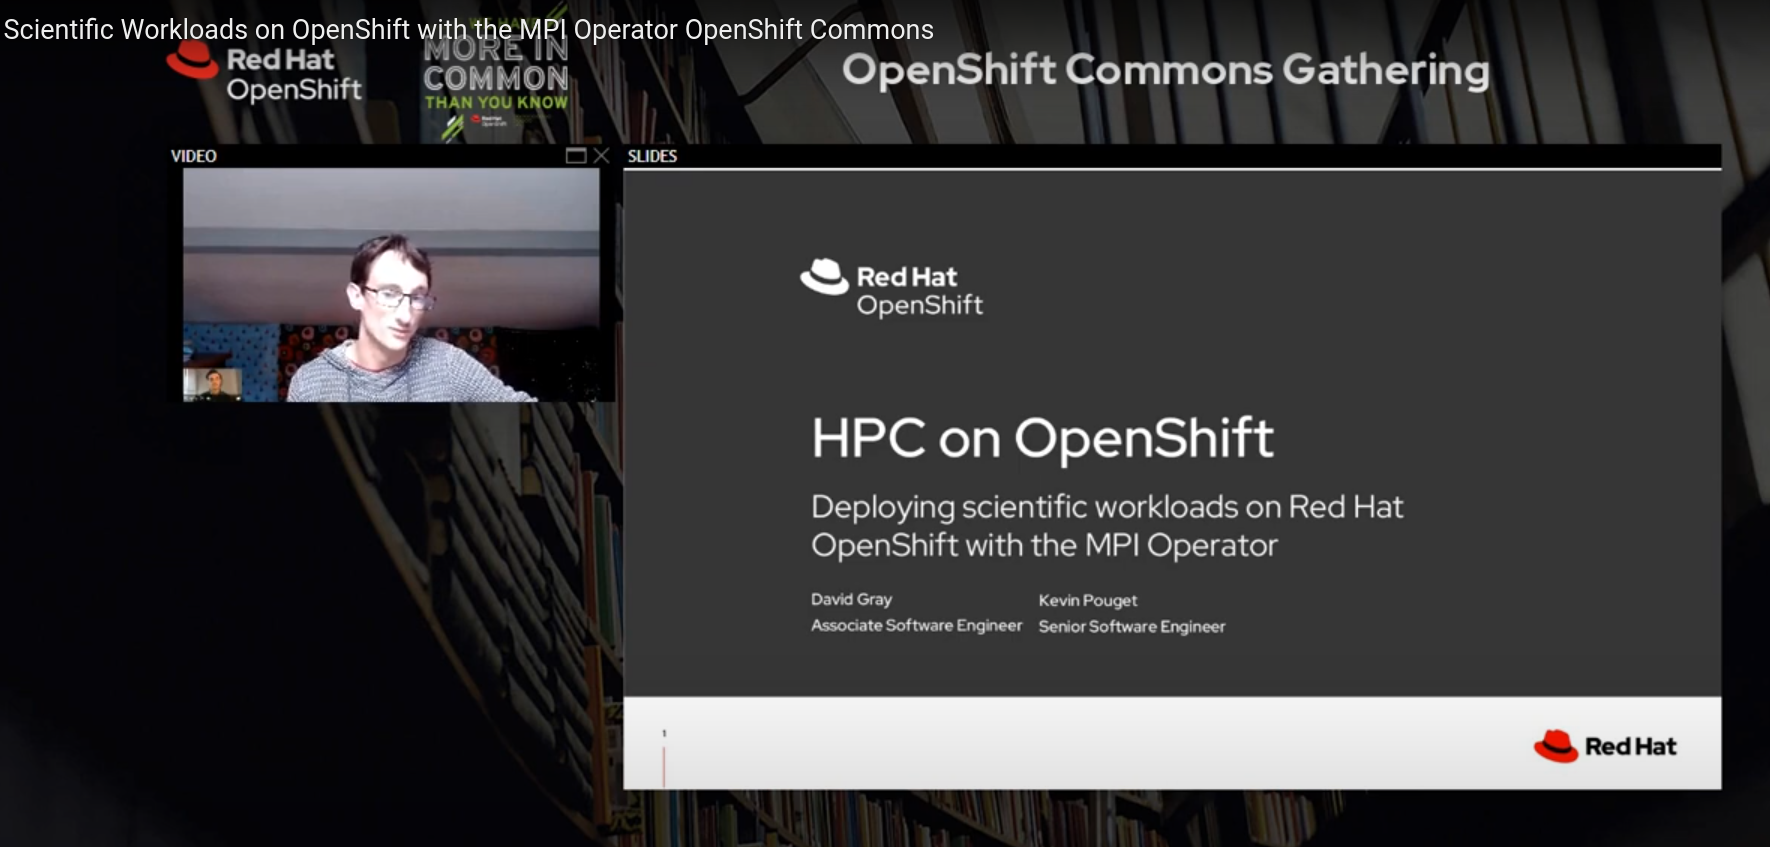 OpenShift Commons